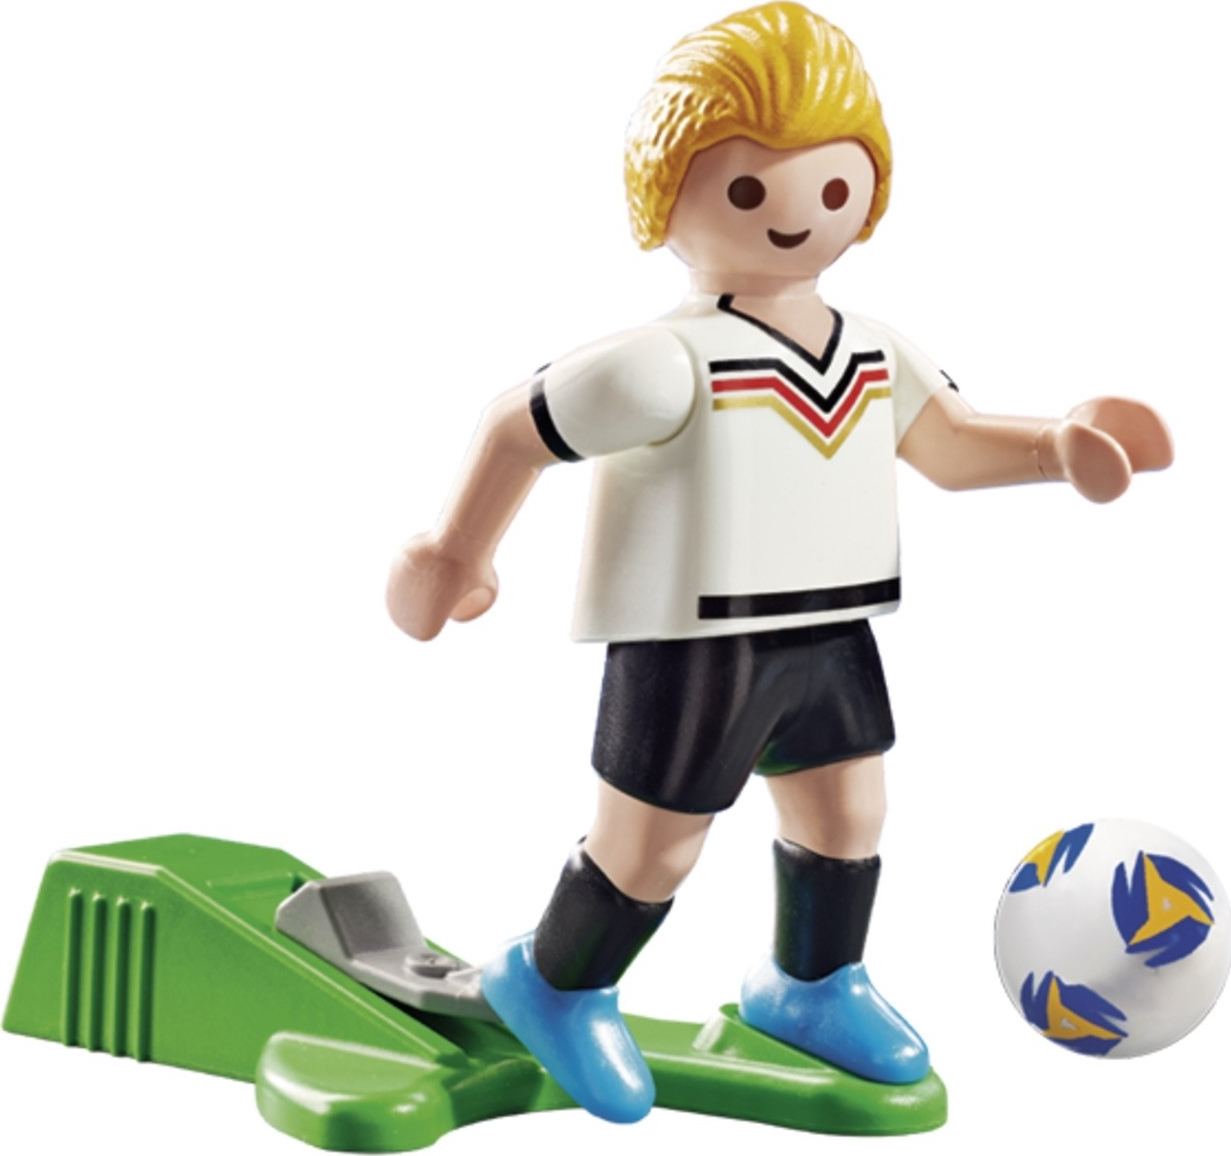 Playmobil 70479 Sports & Action National Football Soccer Player - Germany,  NEW!